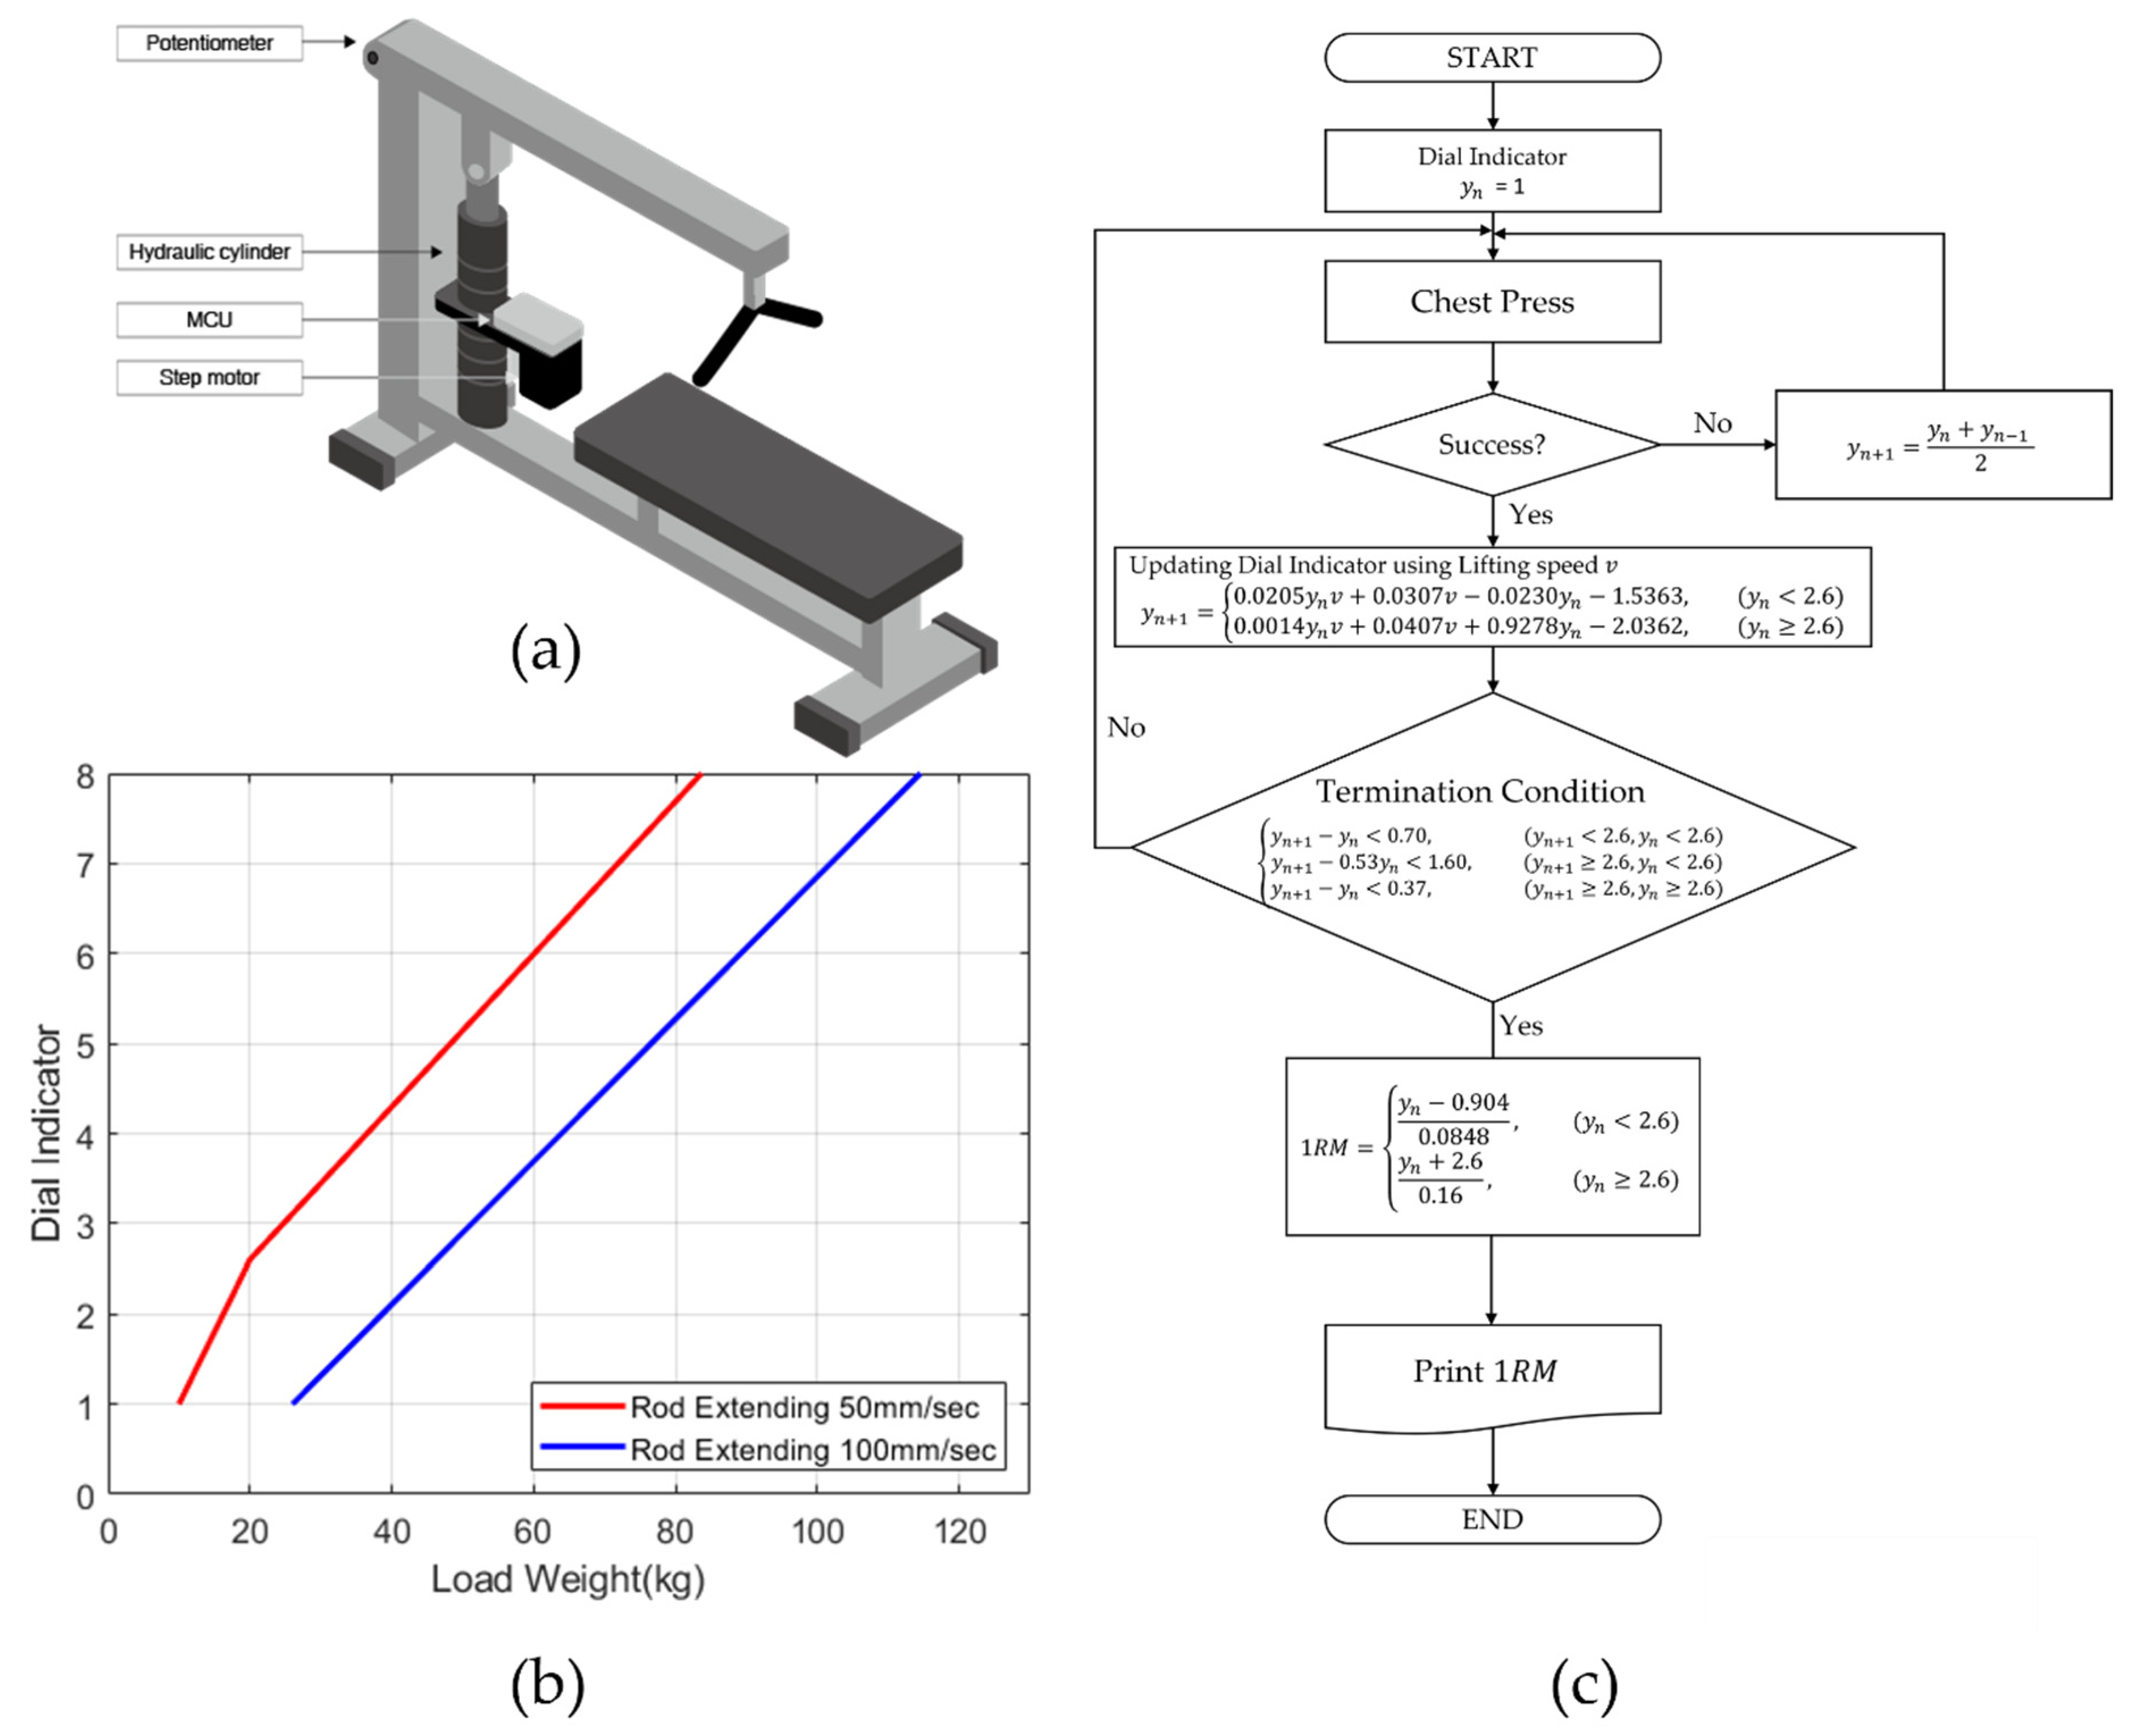 Sensors | Free Full-Text | Estimation of 1-Repetition Maximum Using a  Hydraulic Bench Press Machine Based on User&rsquo;s Lifting Speed and Load  Weight